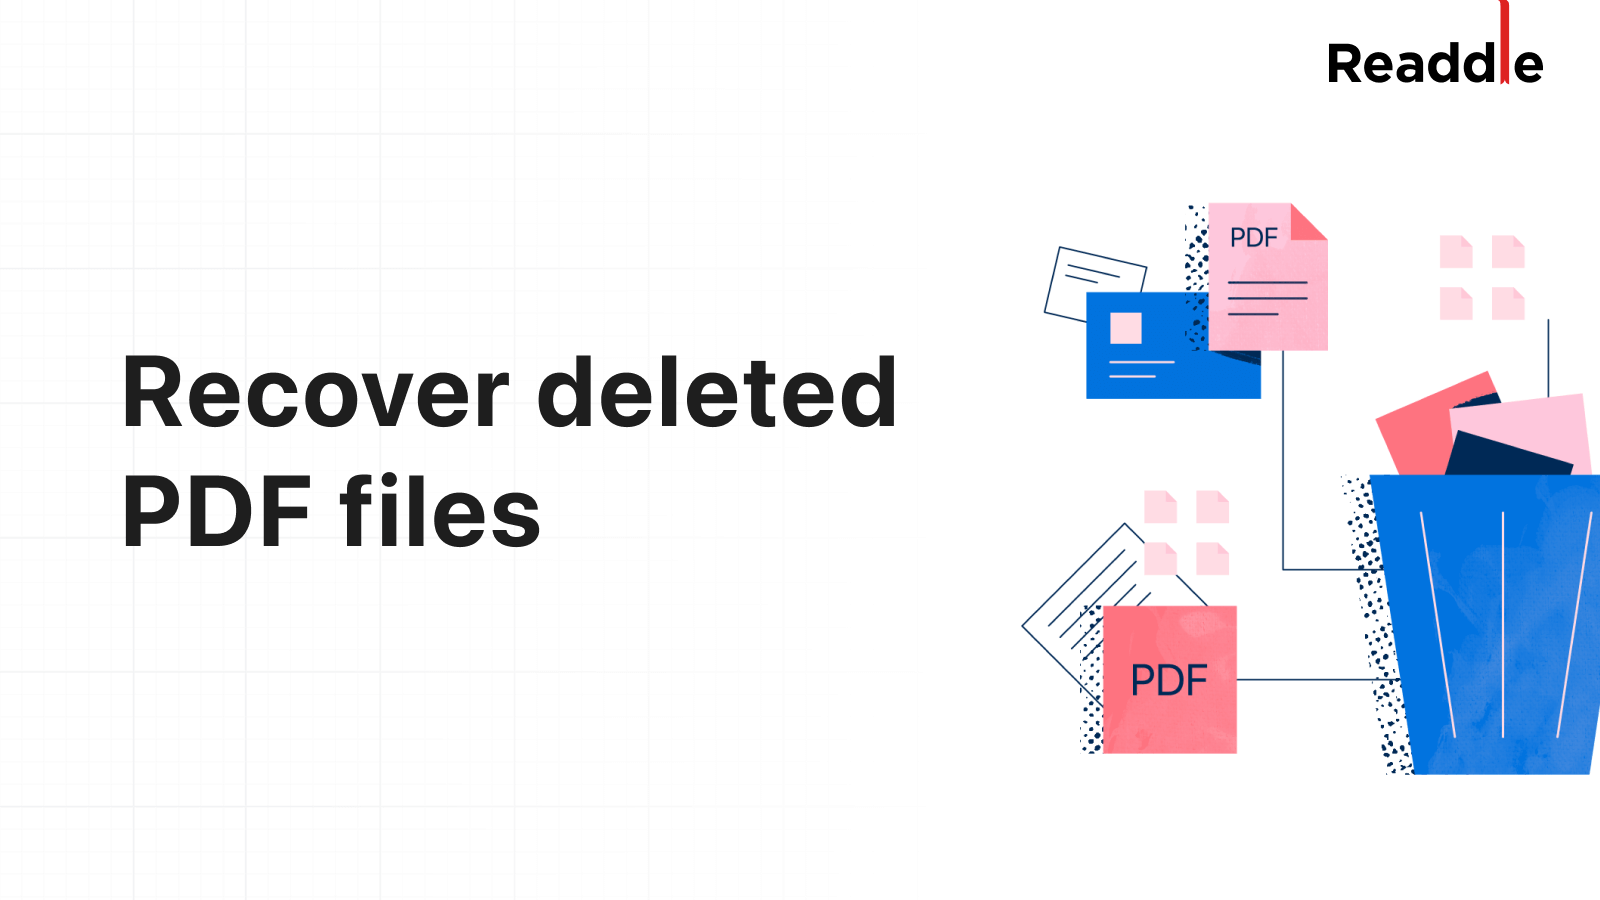 Step by step Guide to Recovering Deleted PDF Files 255787 1 - Step-by-step Guide to Recovering Deleted PDF Files